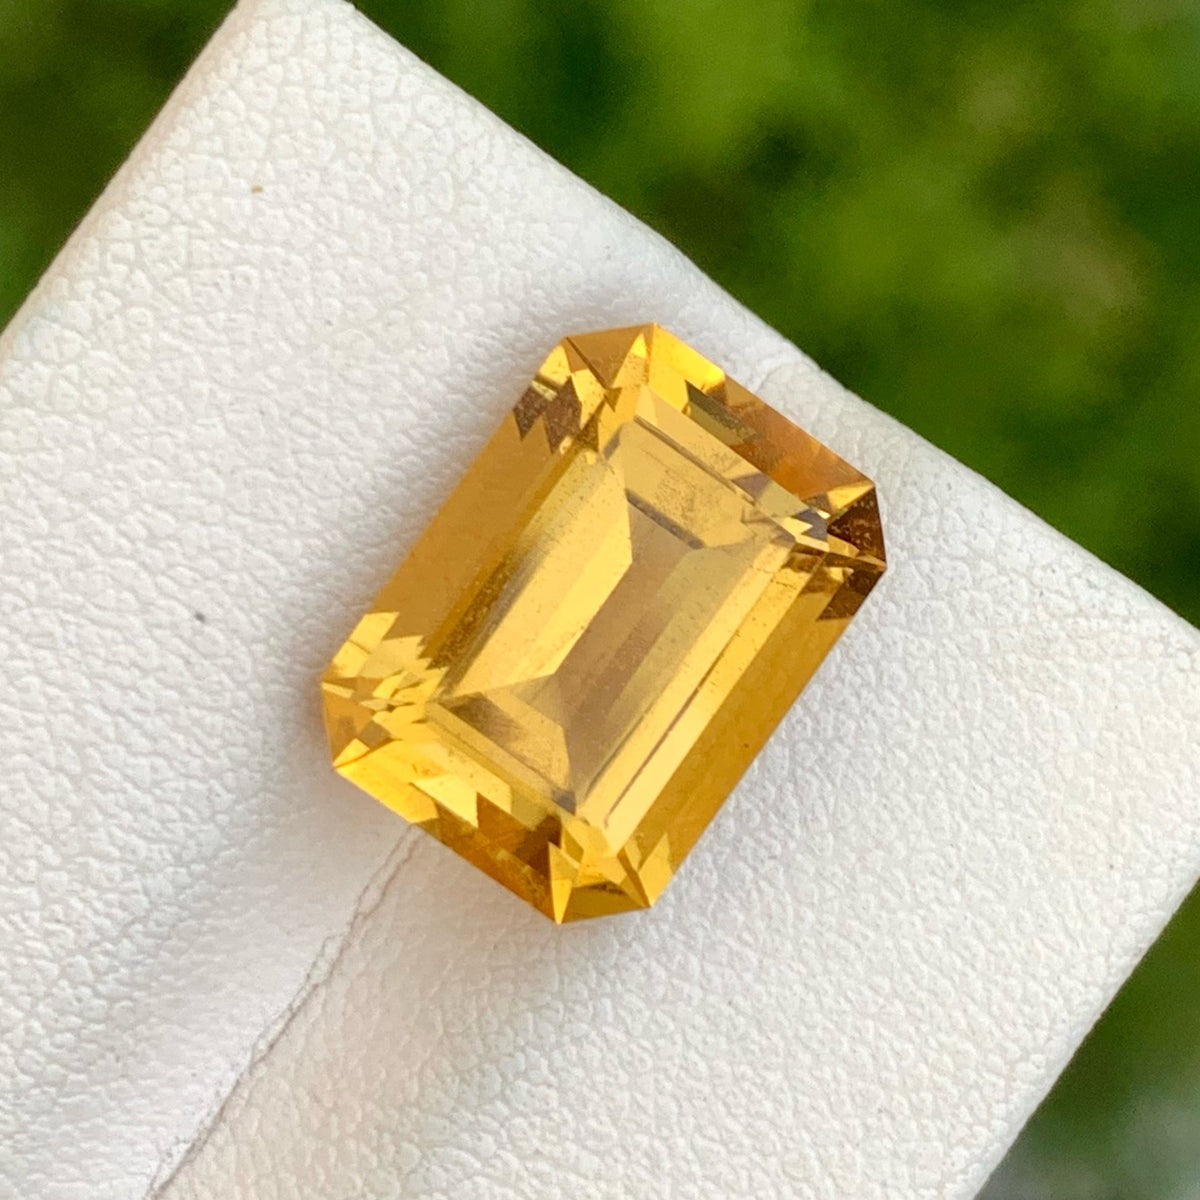 Golden Heliodor 7.20 carats Loose Gemstone from Brazil